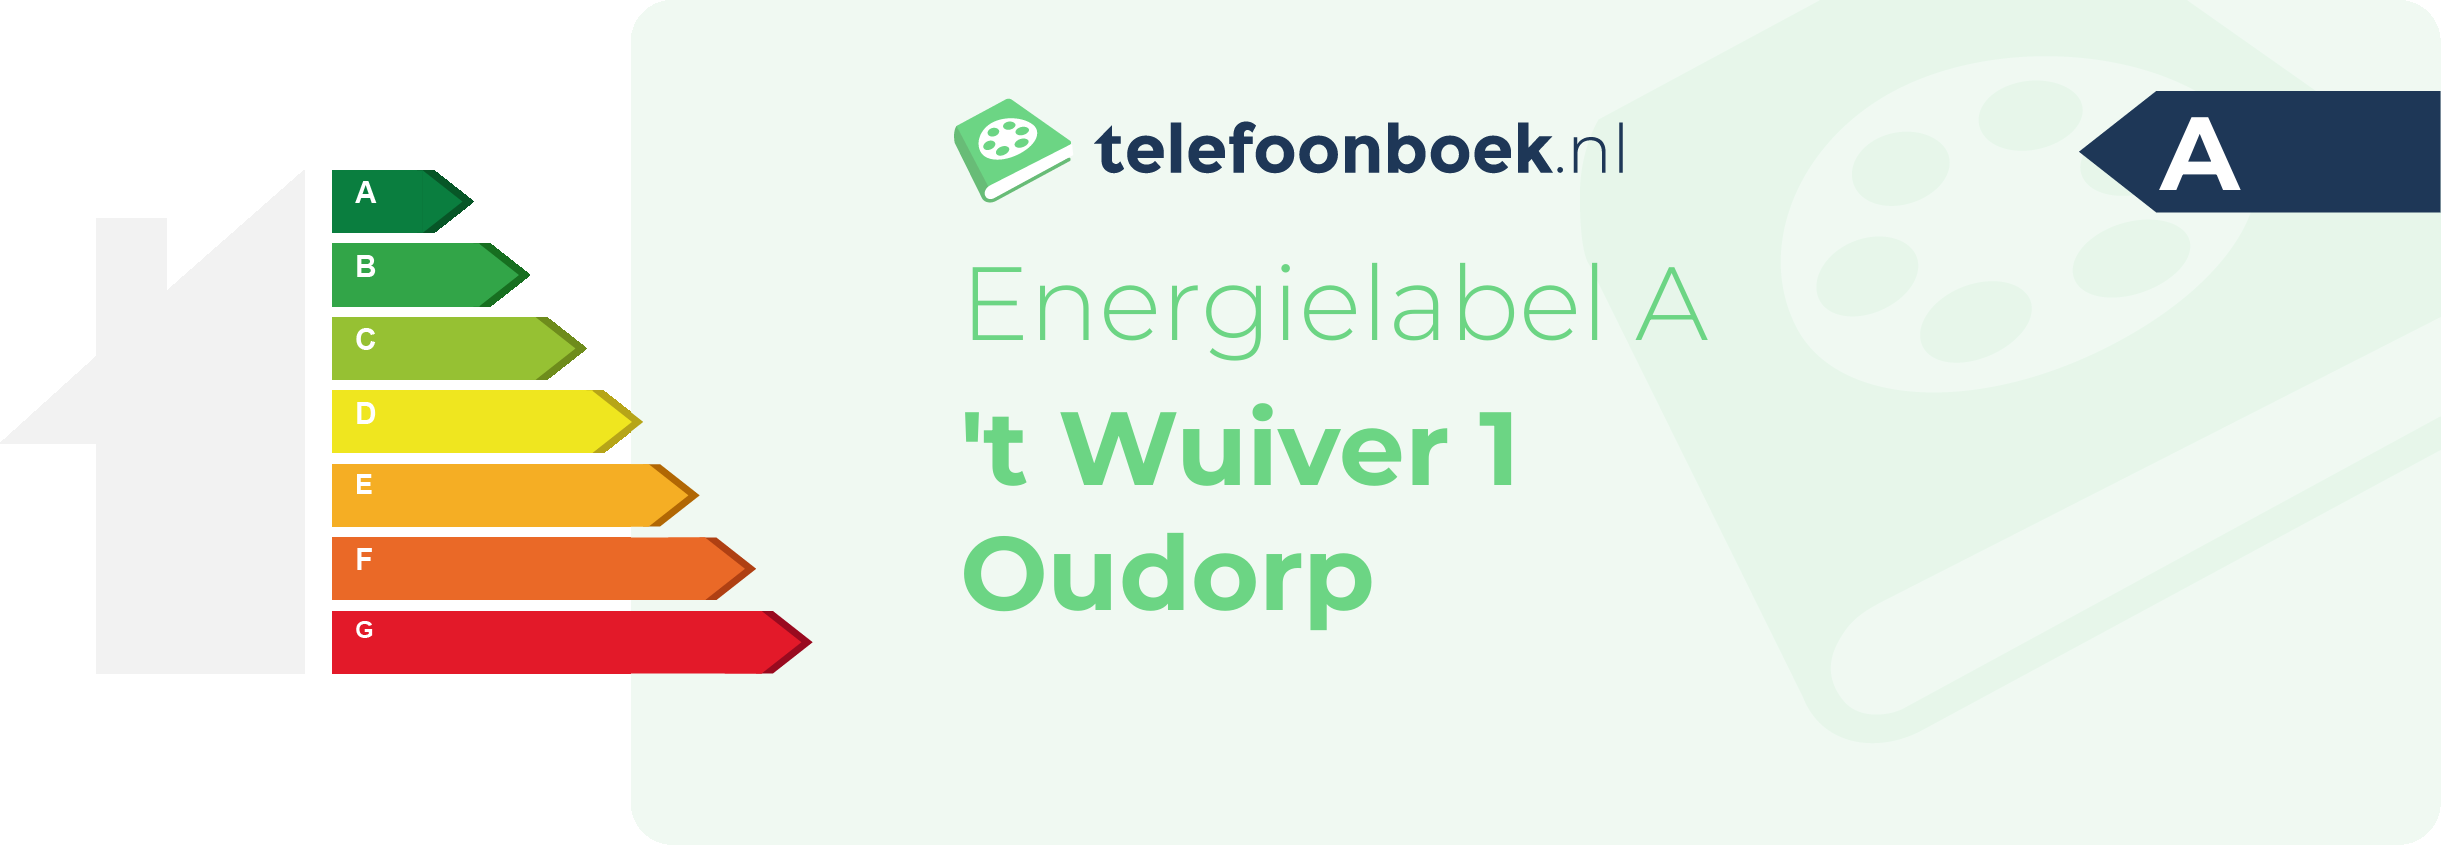 Energielabel 't Wuiver 1 Oudorp